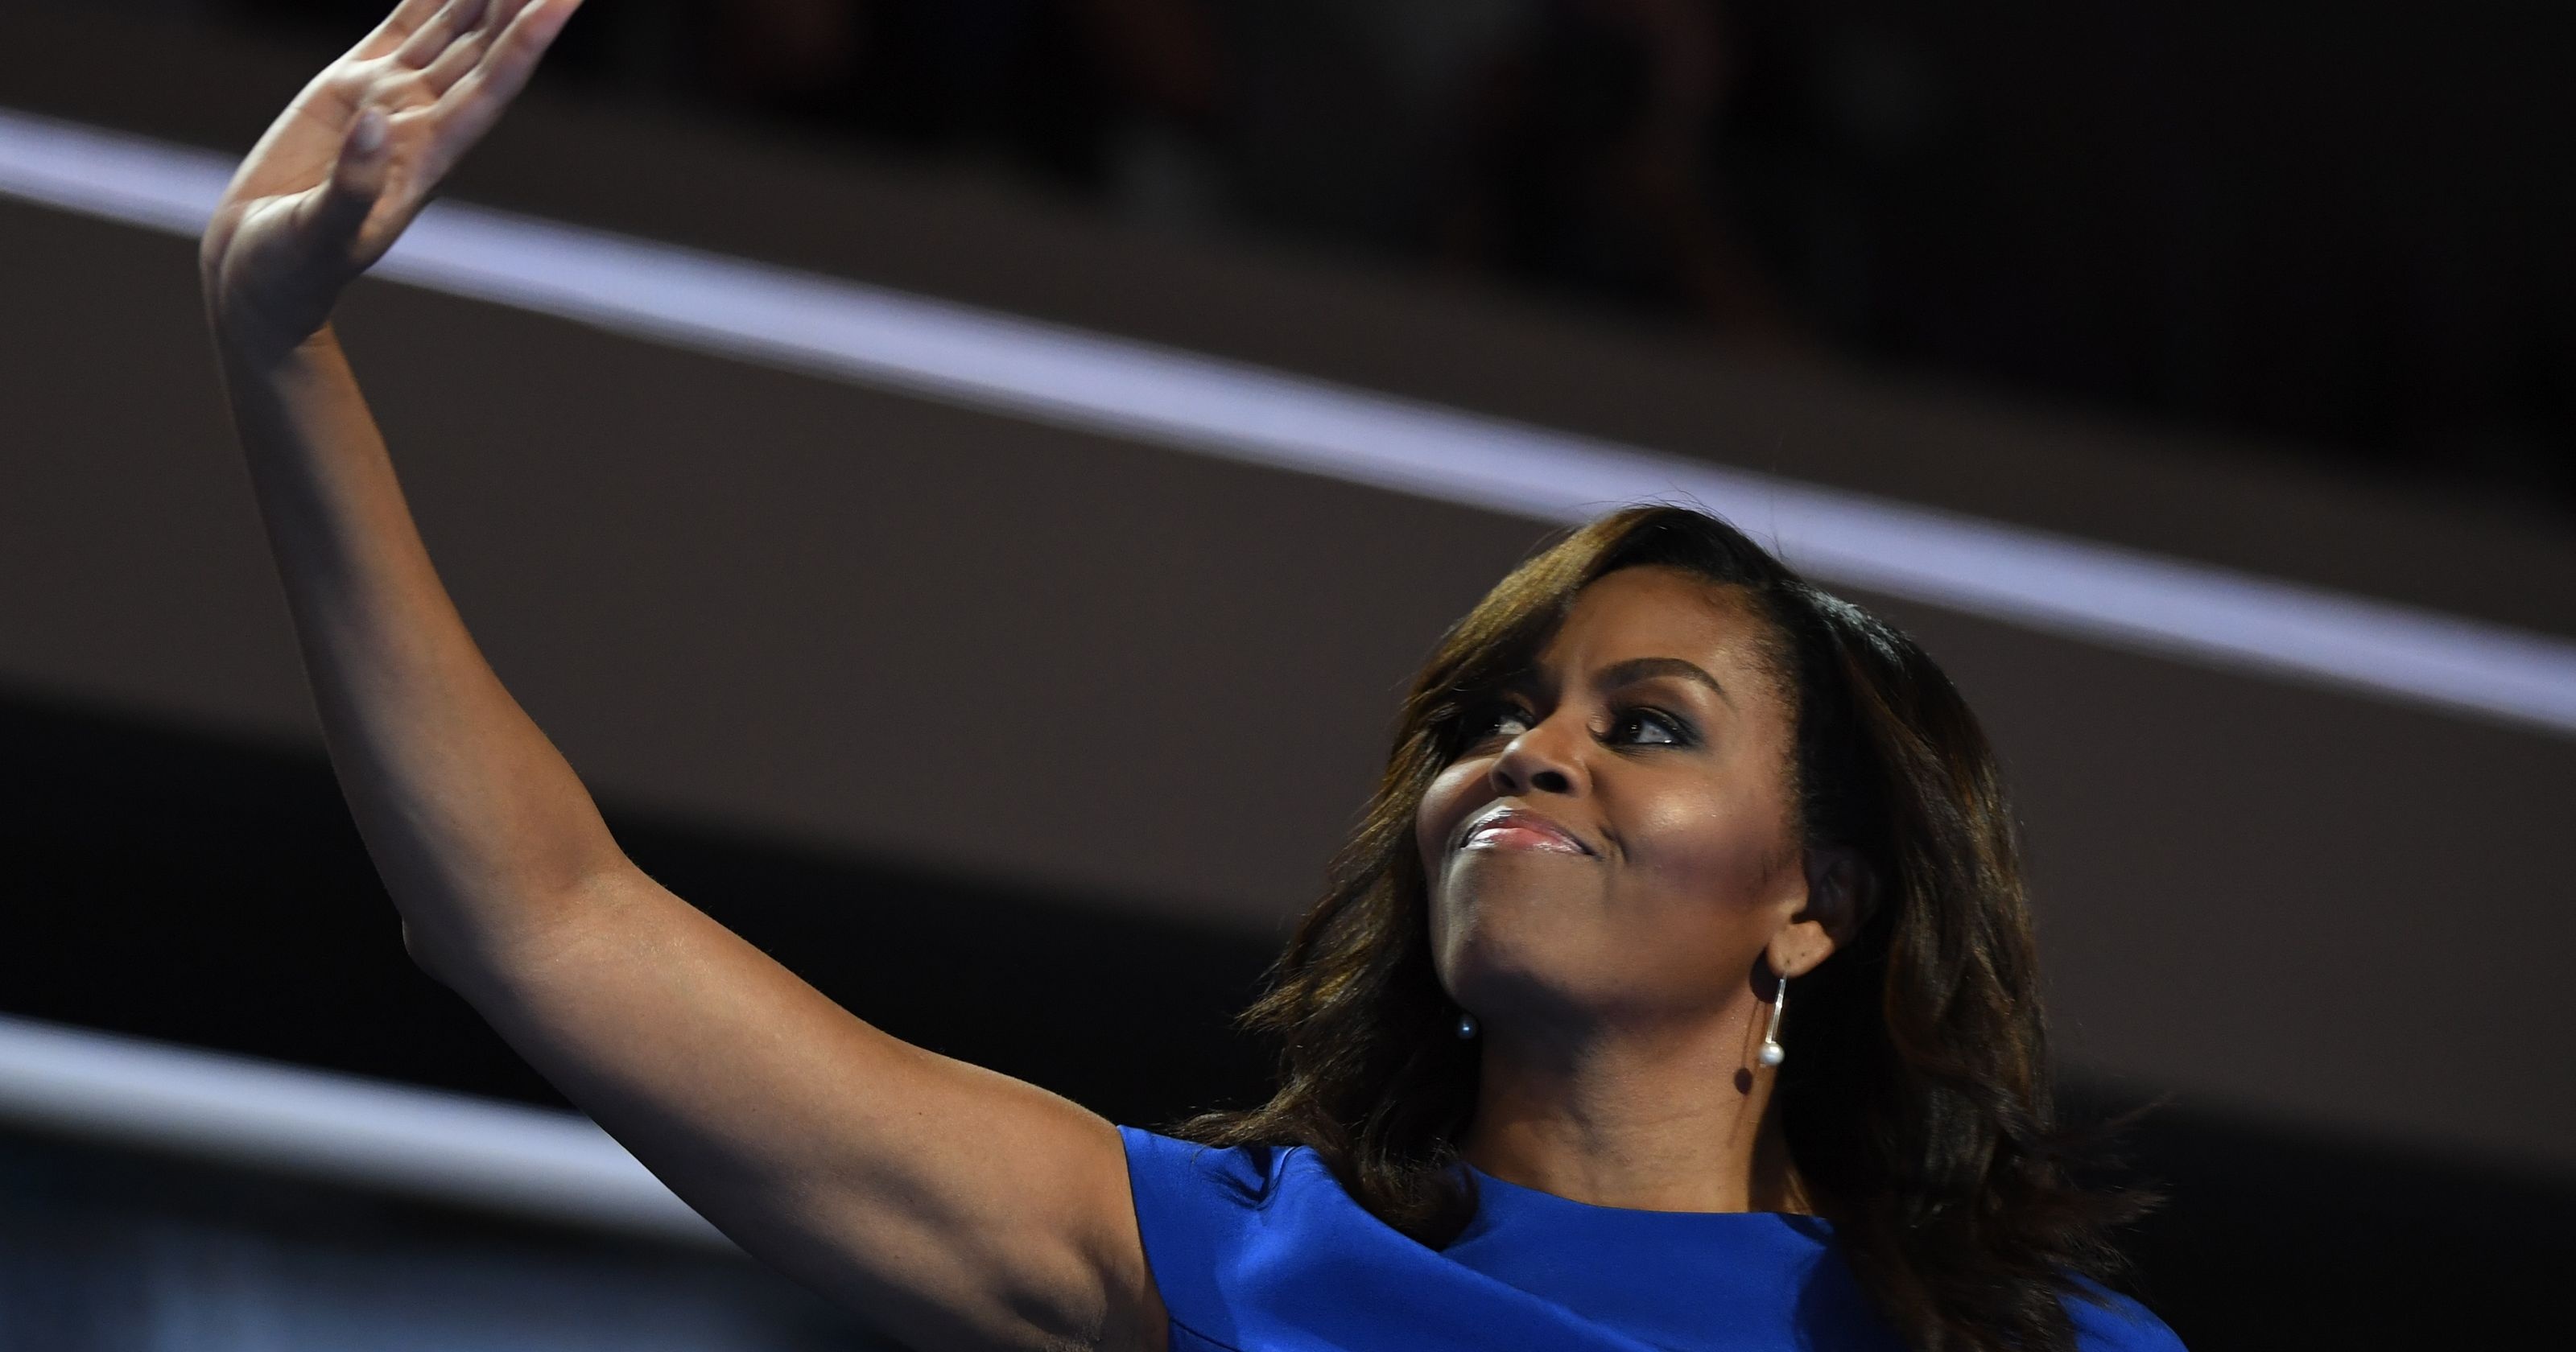 Michelle Obama: Campaigned for her husband's presidential bid throughout 2007 and 2008. 3200x1680 HD Background.